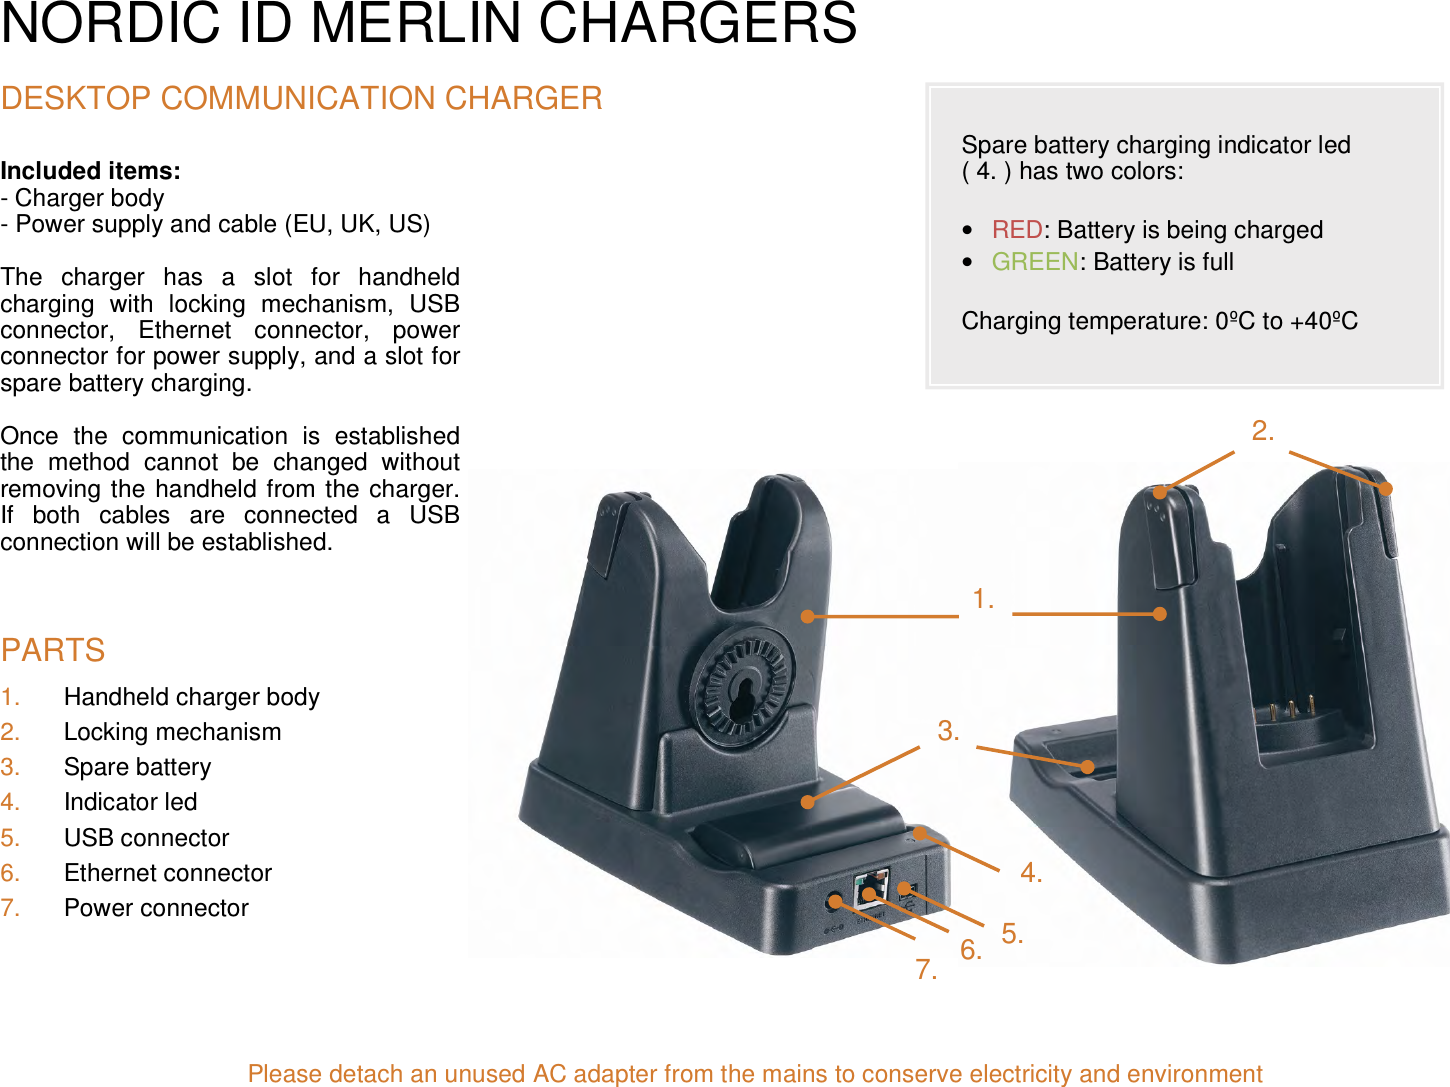 NORDIC ID MERLIN CHARGERS  DESKTOP COMMUNICATION CHARGER Included items:  - Charger body - Power supply and cable (EU, UK, US)  The  charger  has  a  slot  for  handheld charging  with  locking  mechanism,  USB connector,  Ethernet  connector,  power connector for power supply, and a slot for spare battery charging.  Once  the  communication  is  established the  method  cannot  be  changed  without removing the handheld from the charger. If  both  cables  are  connected  a  USB connection will be established.                              PARTS 1.  Handheld charger body  2.  Locking mechanism  3.  Spare battery  4.  Indicator led  5.  USB connector  6.  Ethernet connector 7.  Power connector                             Please detach an unused AC adapter from the mains to conserve electricity and environment5. 2. 1. 3. 4. 6. 7.  Spare battery charging indicator led  ( 4. ) has two colors:   • RED: Battery is being charged • GREEN: Battery is full  Charging temperature: 0ºC to +40ºC 